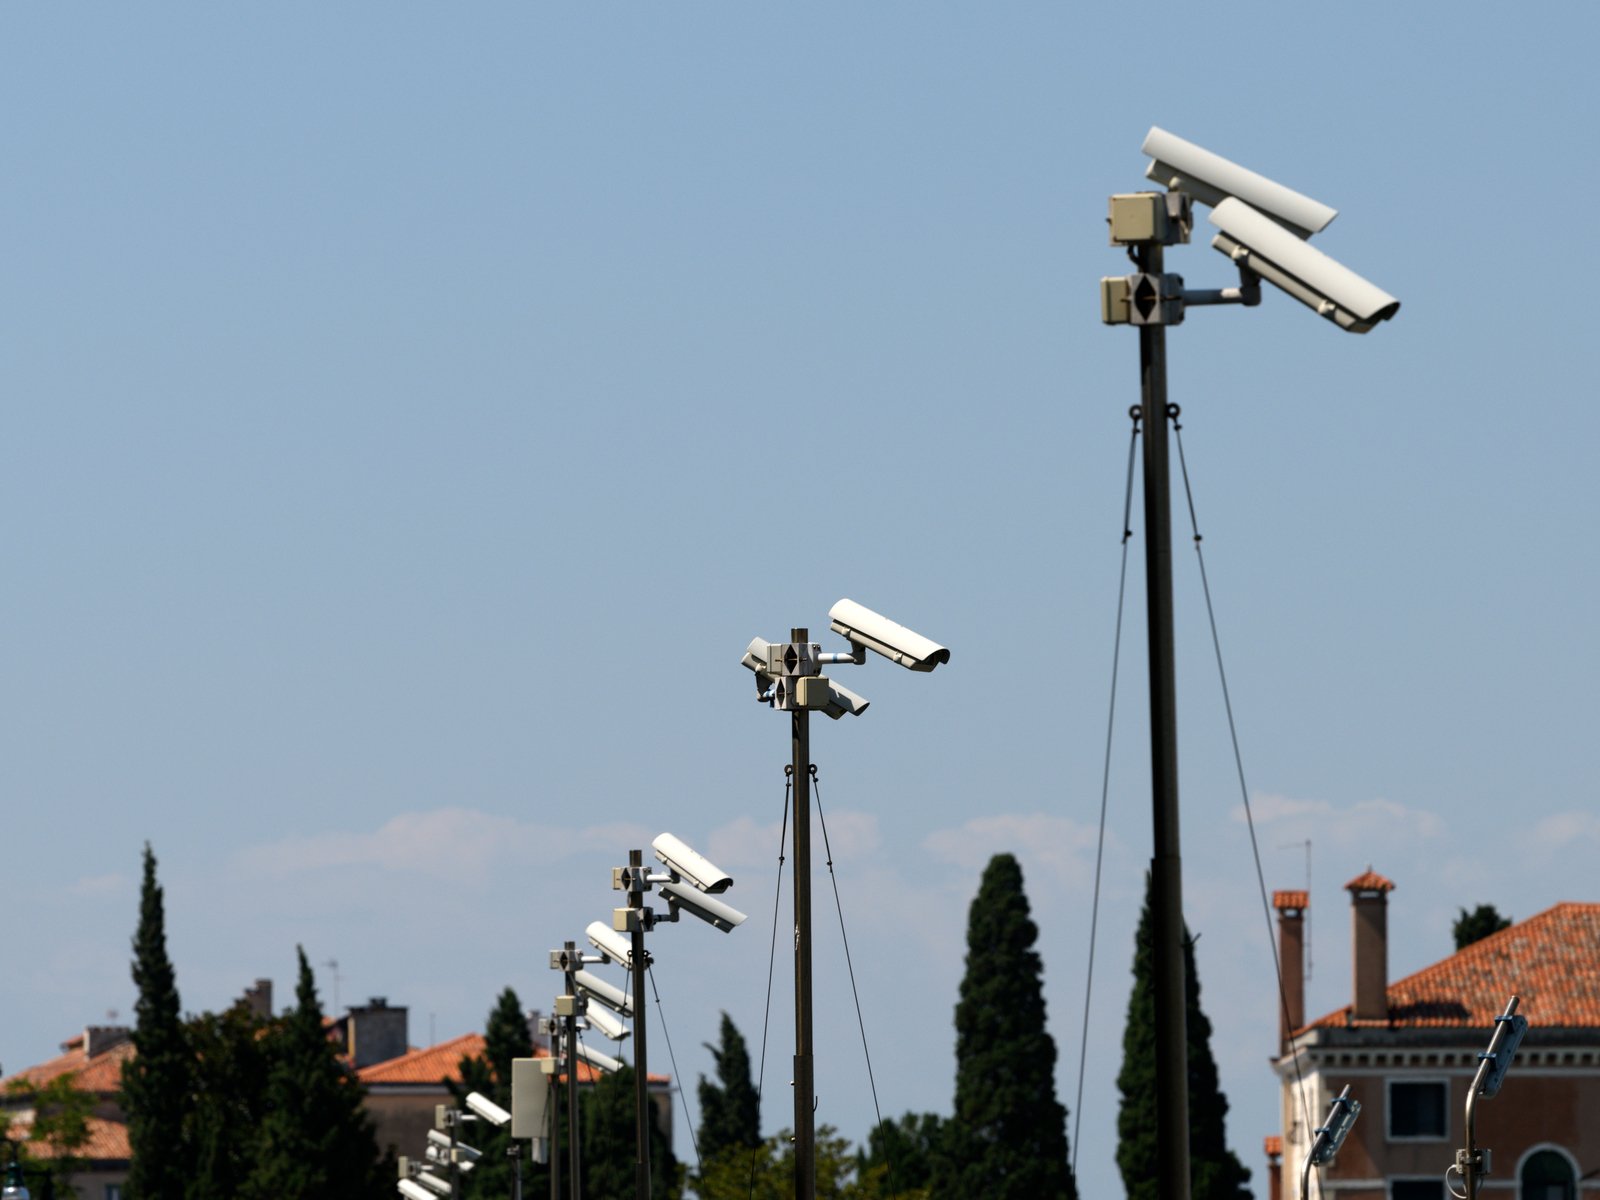 Venice Uses Hundreds of Cameras to Monitor Tourists' Movements&nbsp;